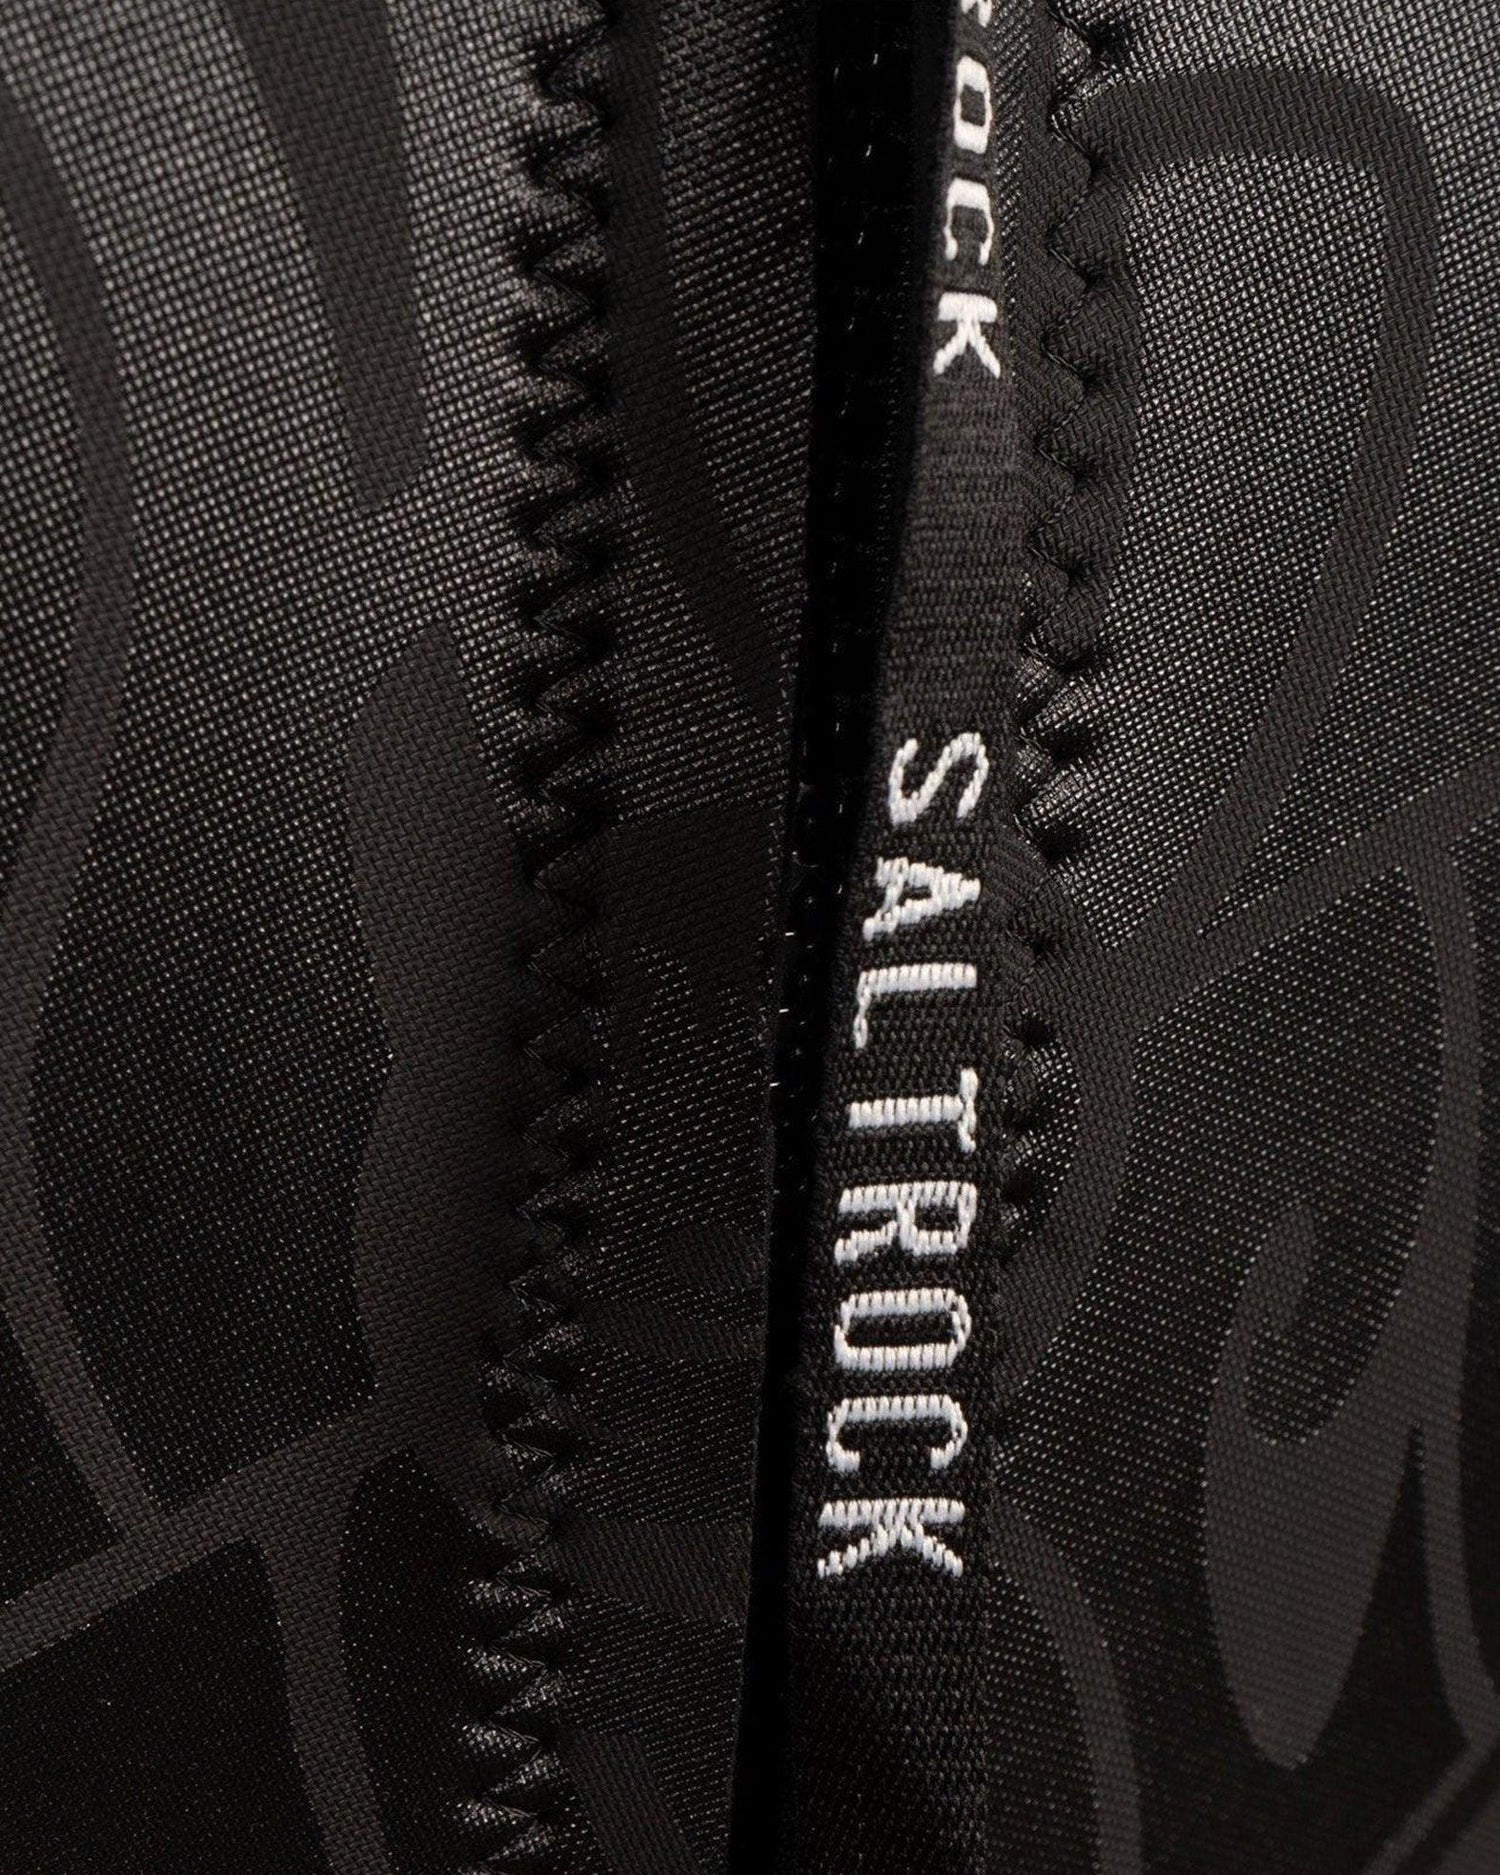 Close-up of a black neoprene Saltrock backpack fabric detail, showing textured patterns and a YKK zipper seam.